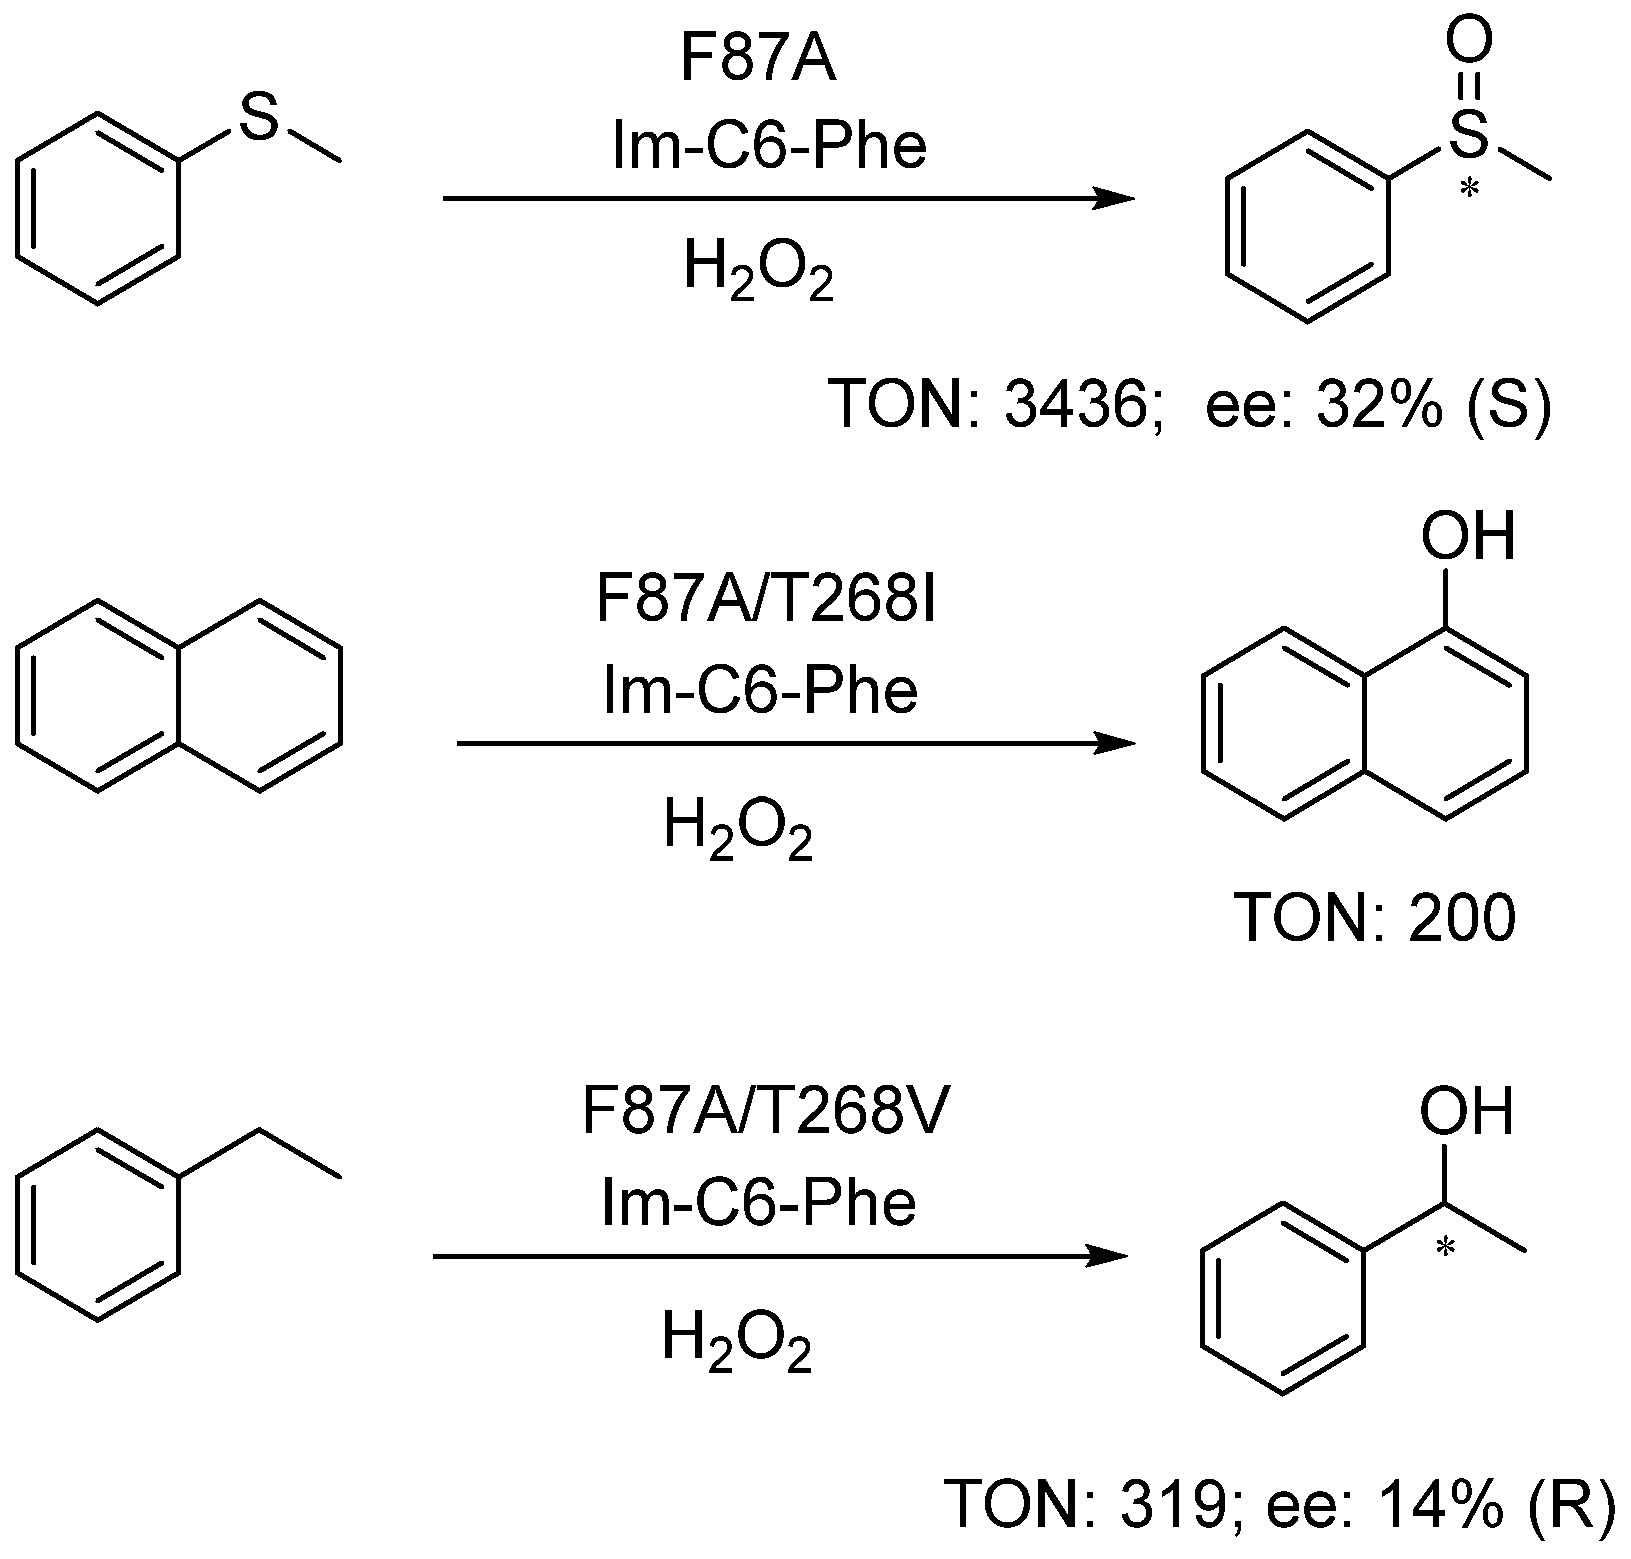 Substrates and Major Products of P450 Peroxygenase Reactions with 2- Phenoxyethanol and p-Nitrophenoxydodecanoic Acid (12-pNCA)